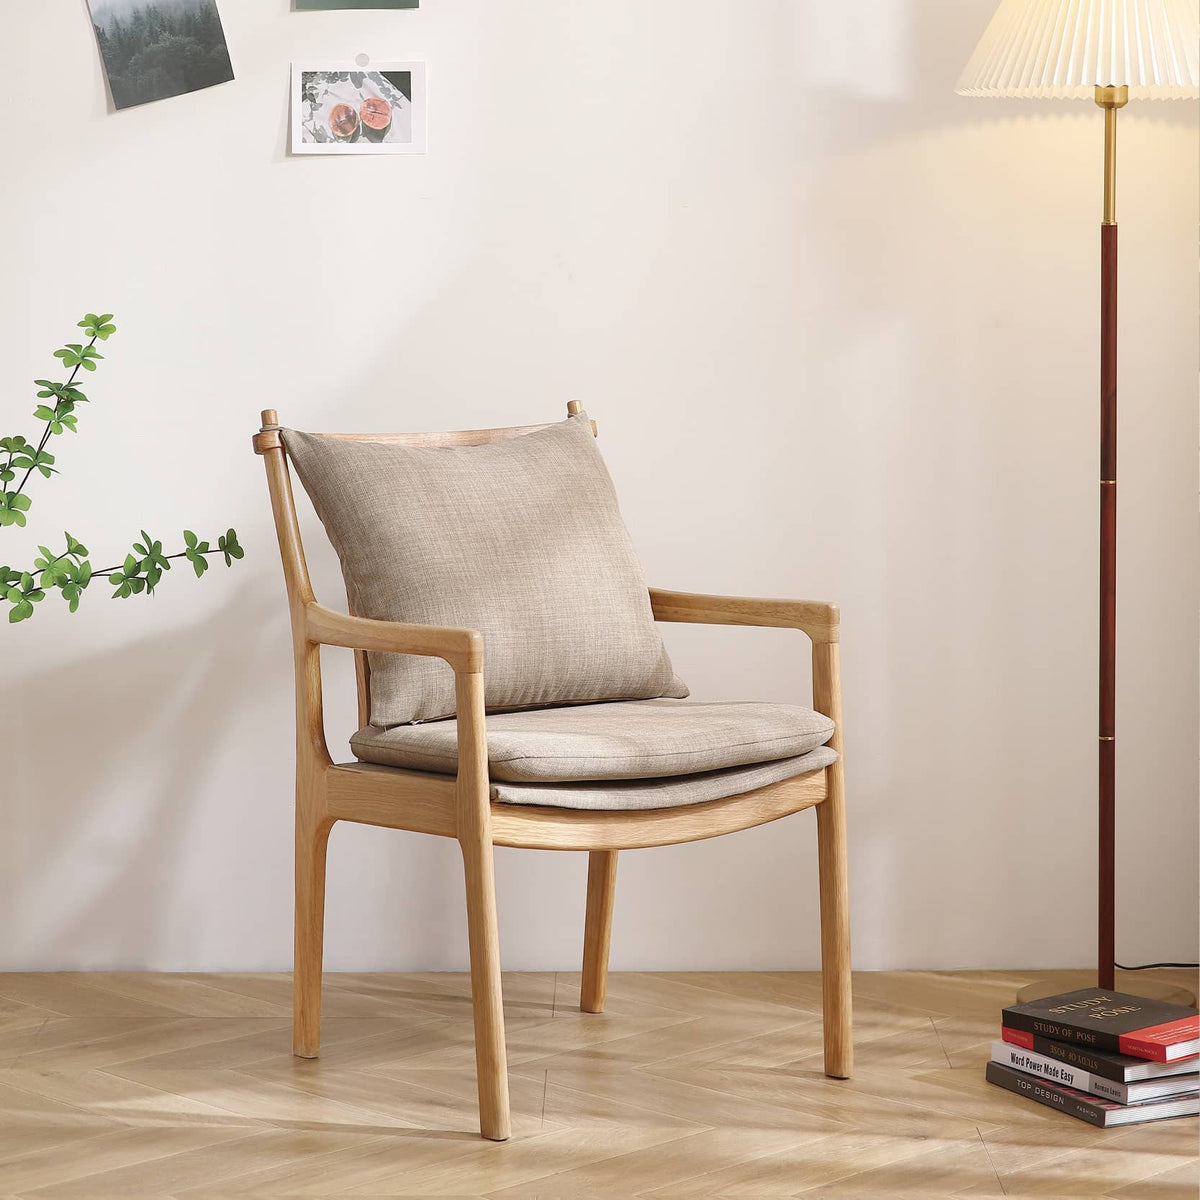 Elegant Light Brown Oak Wood Chair with Cotton & Linen Upholstery and Foam Padding hmzj-807